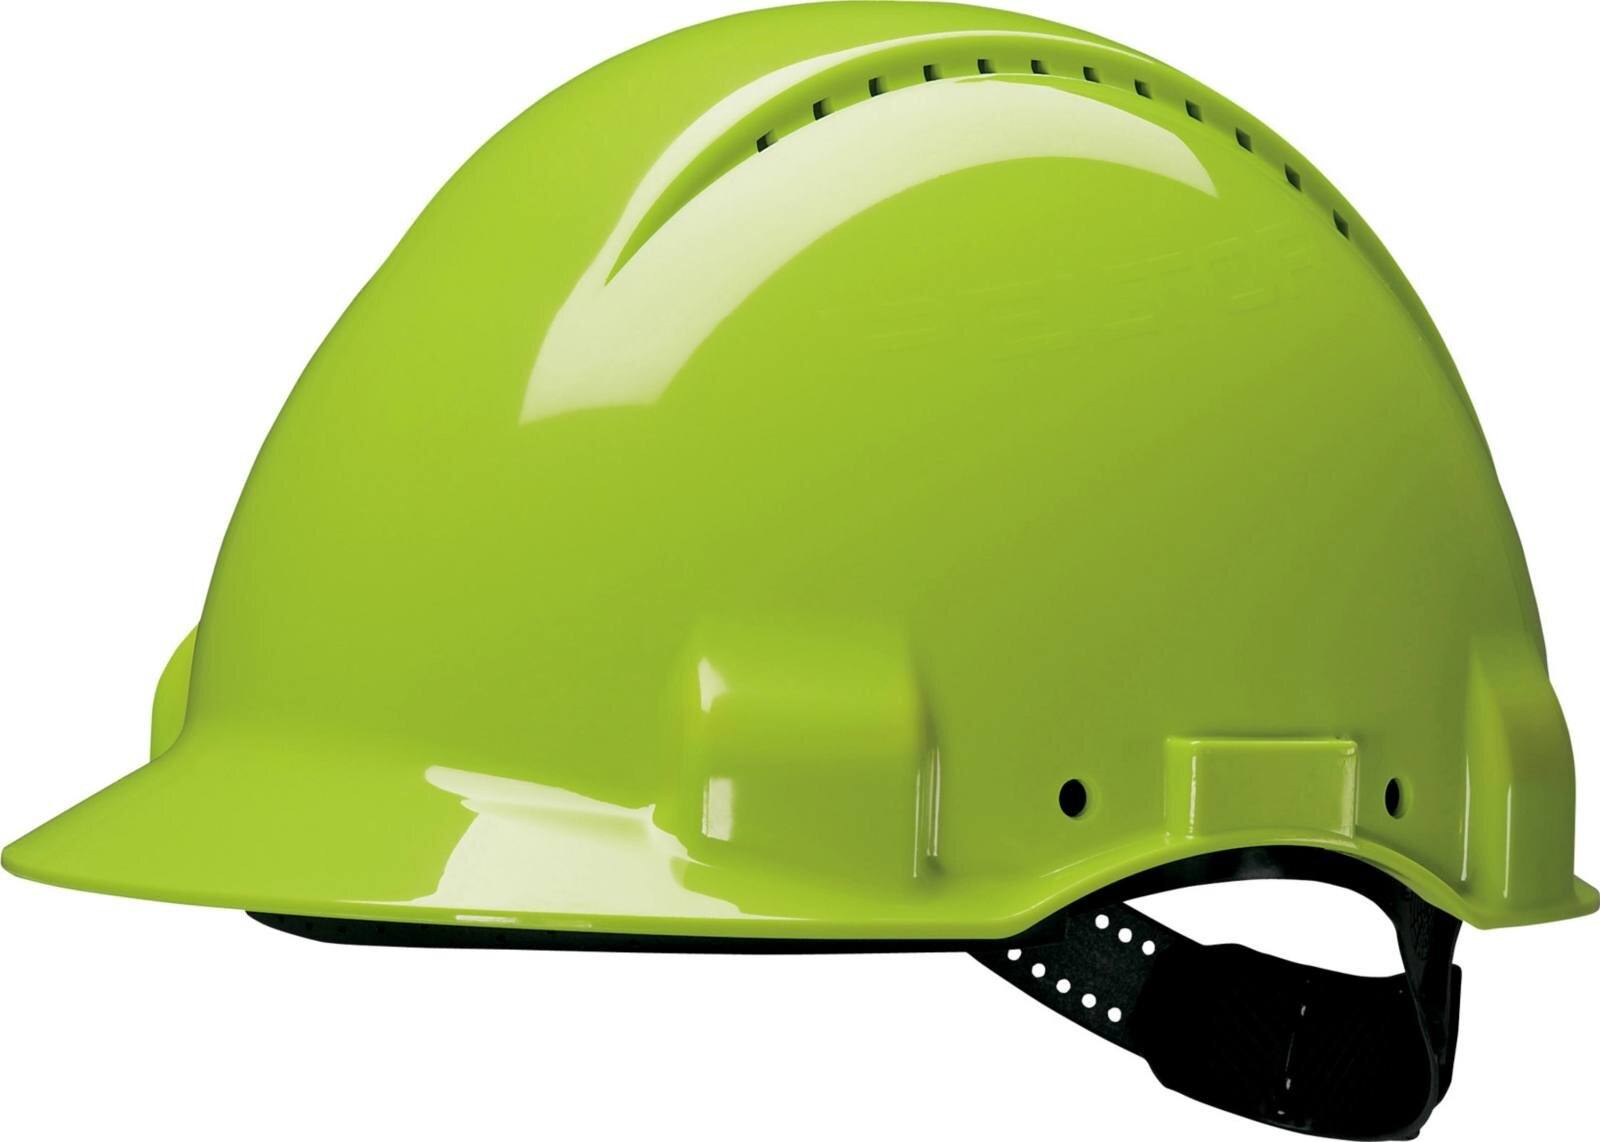 3M G3000 safety helmet G30CUV in neon green, ventilated, with uvicator, pinlock and plastic sweatband